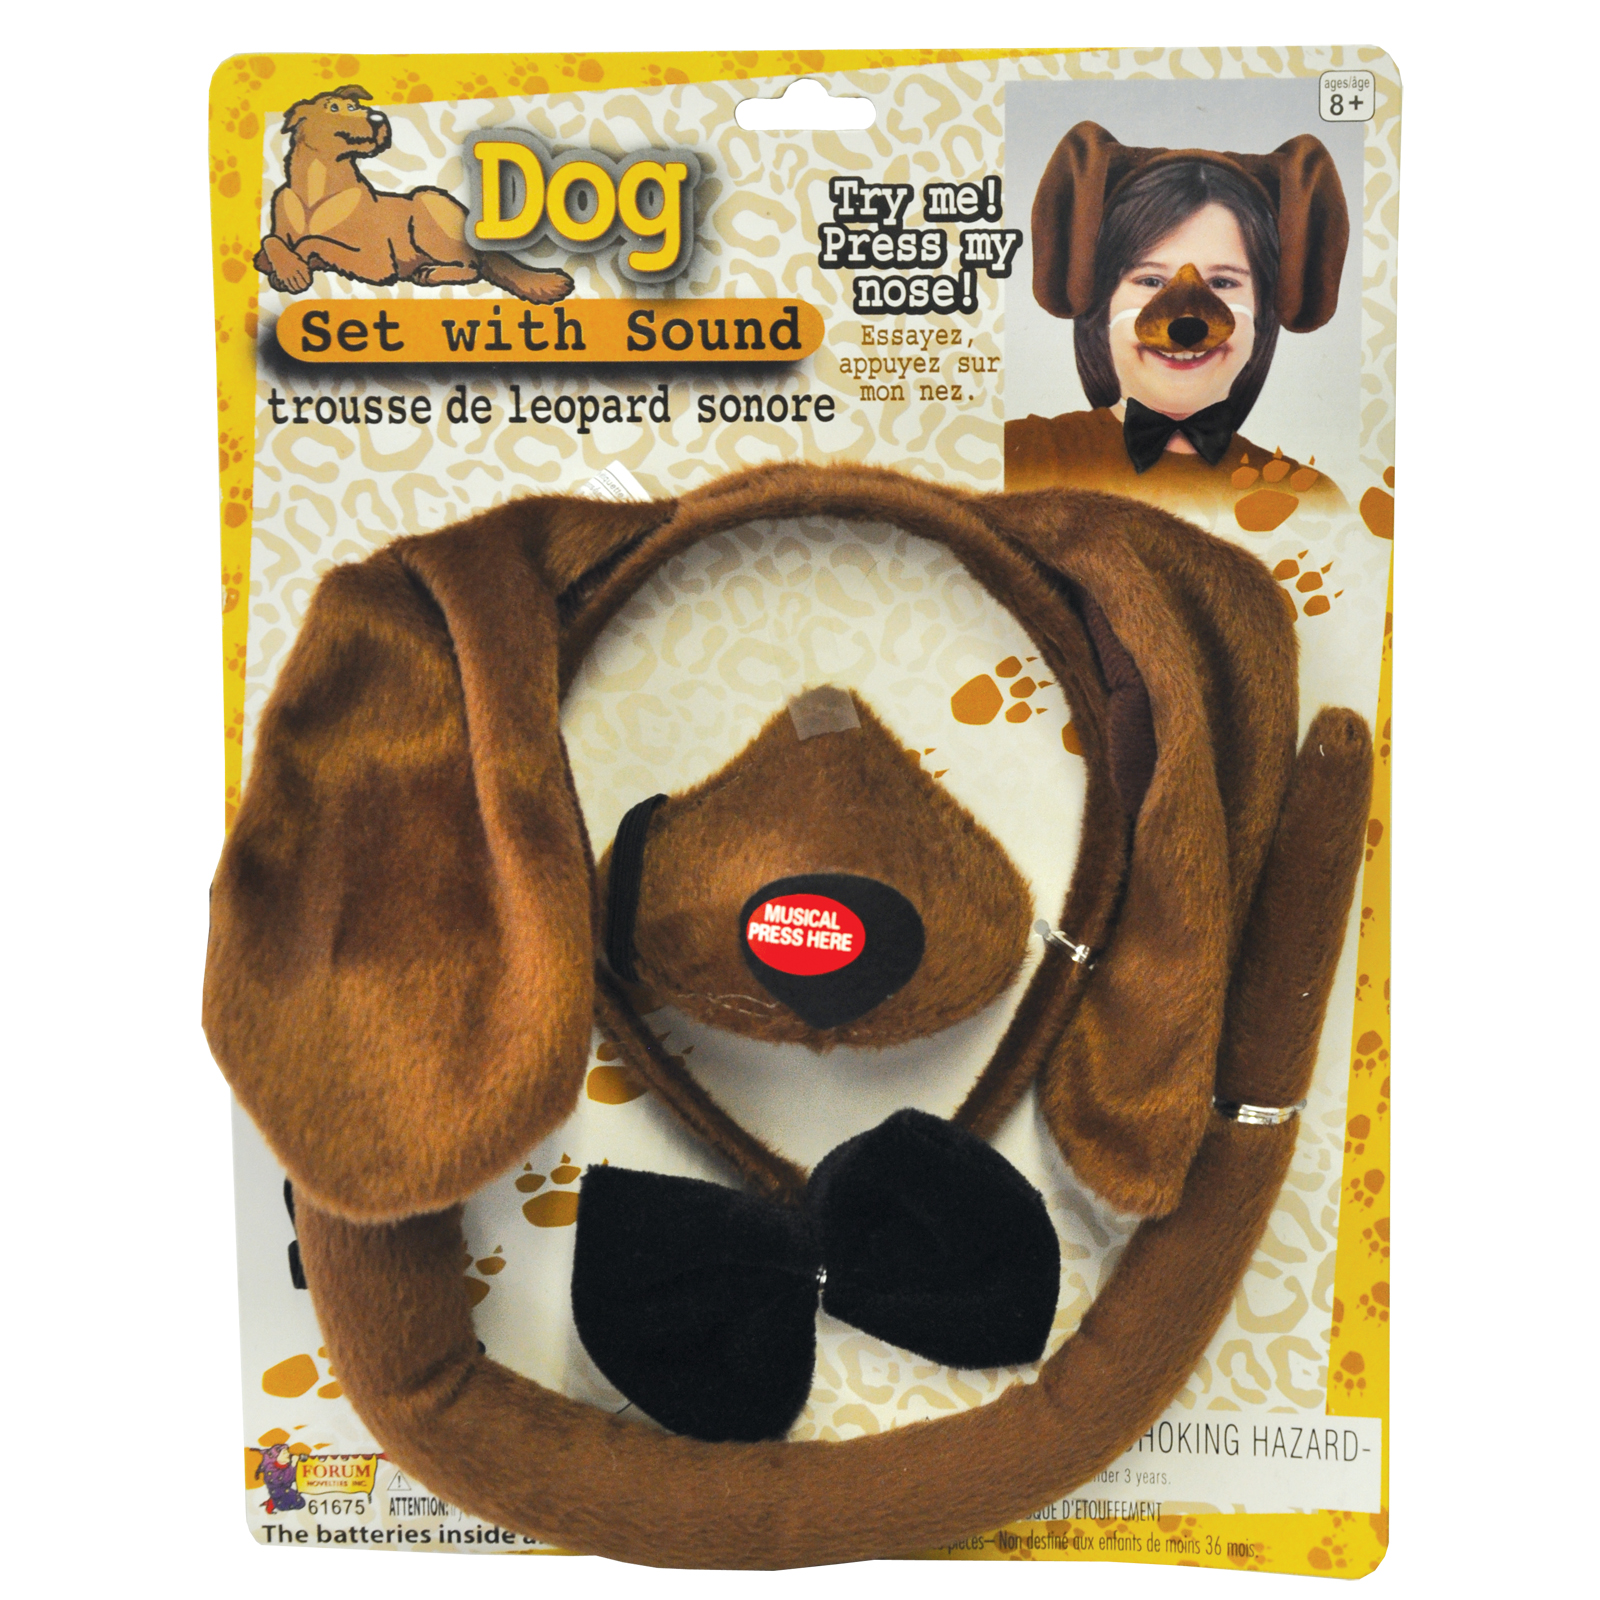 Dog Set with Sound Costume Accessory